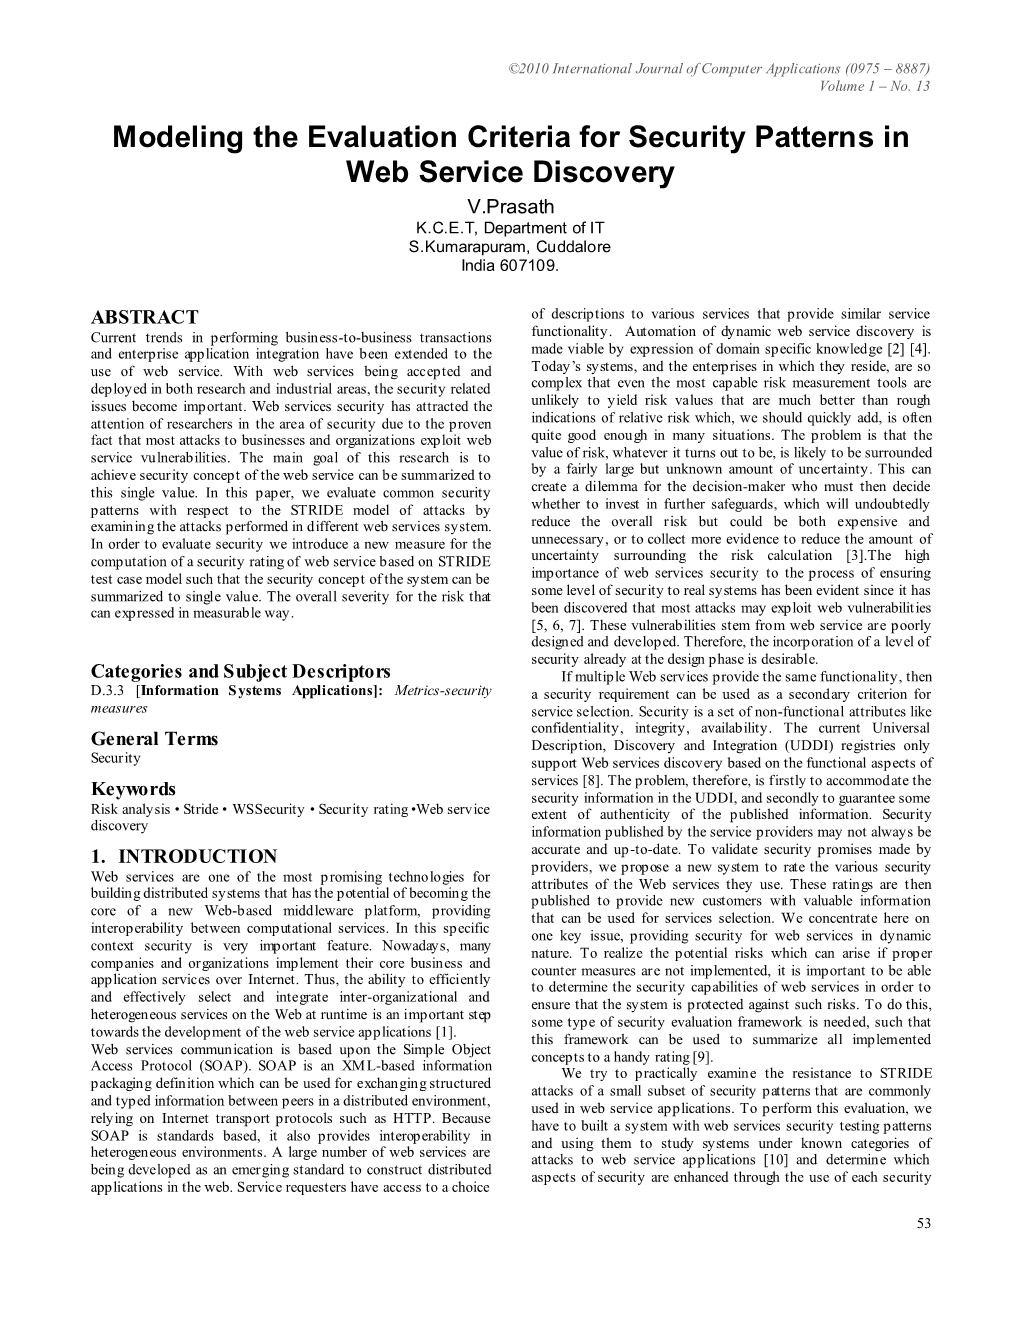 Modeling the Evaluation Criteria for Security Patterns in Web Service Discovery V.Prasath K.C.E.T, Department of IT S.Kumarapuram, Cuddalore India 607109